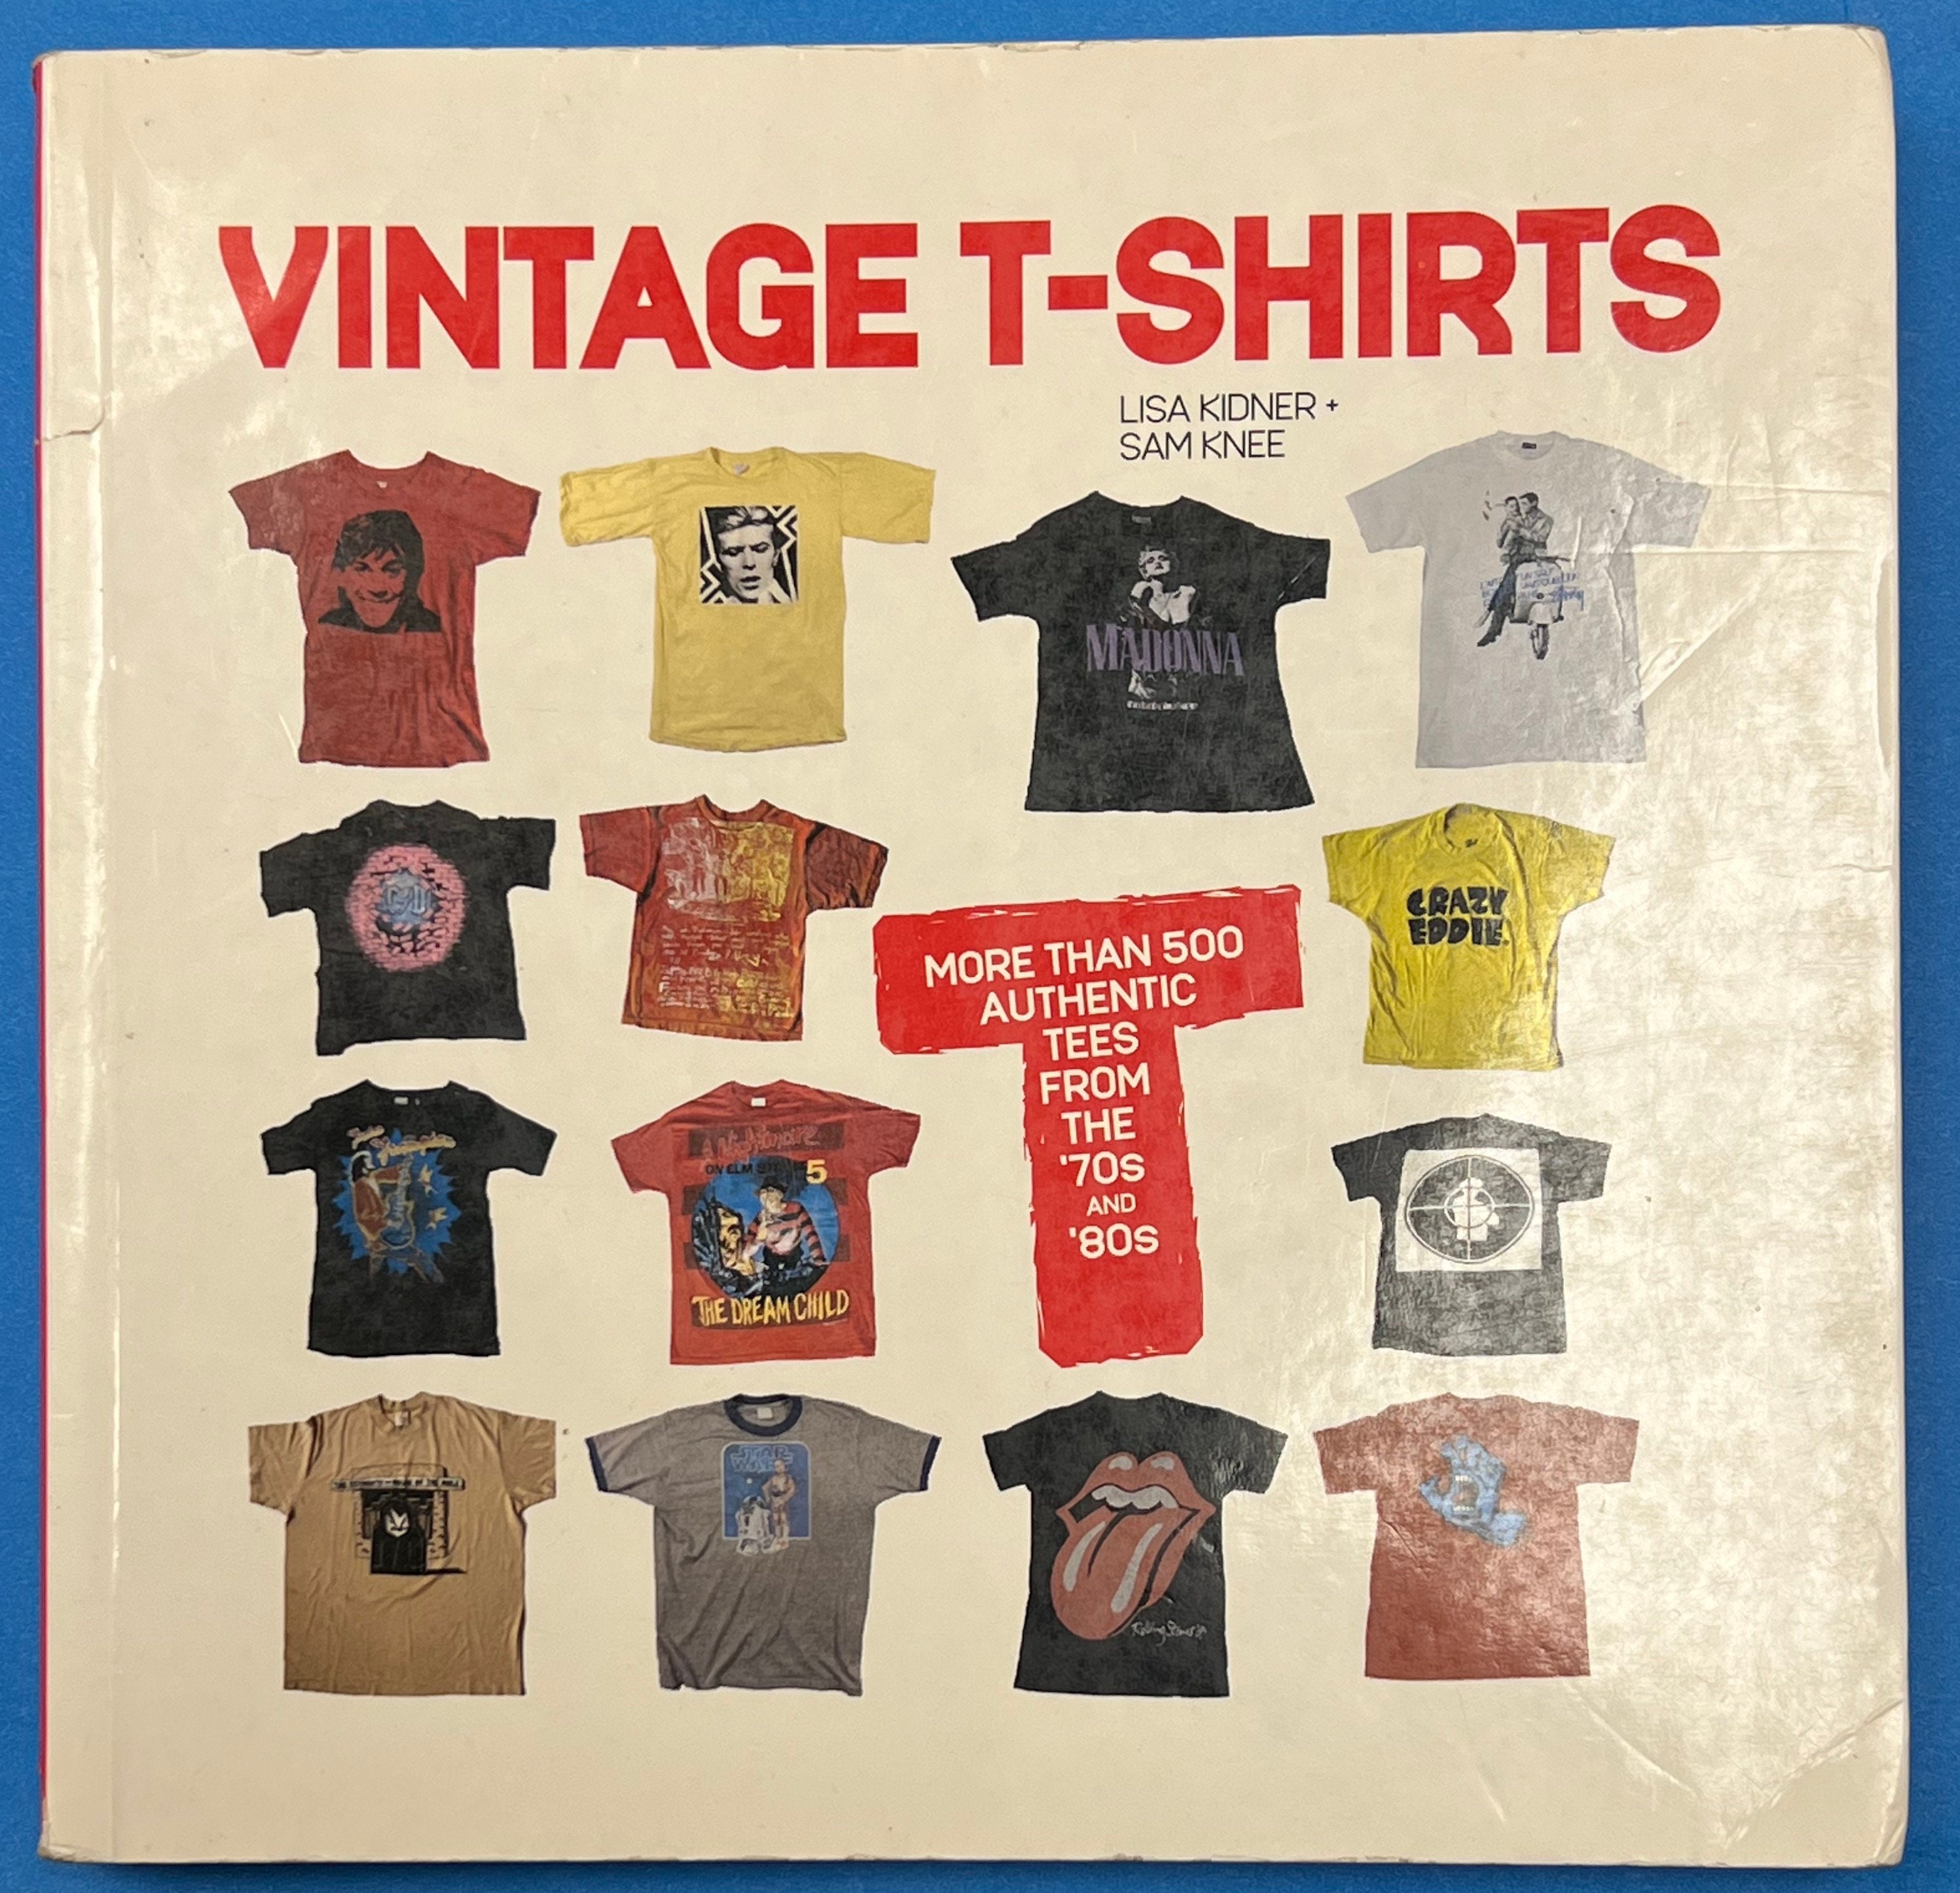 Vintage T-shirts: More Than 500 Authentic Tees From the '70s and